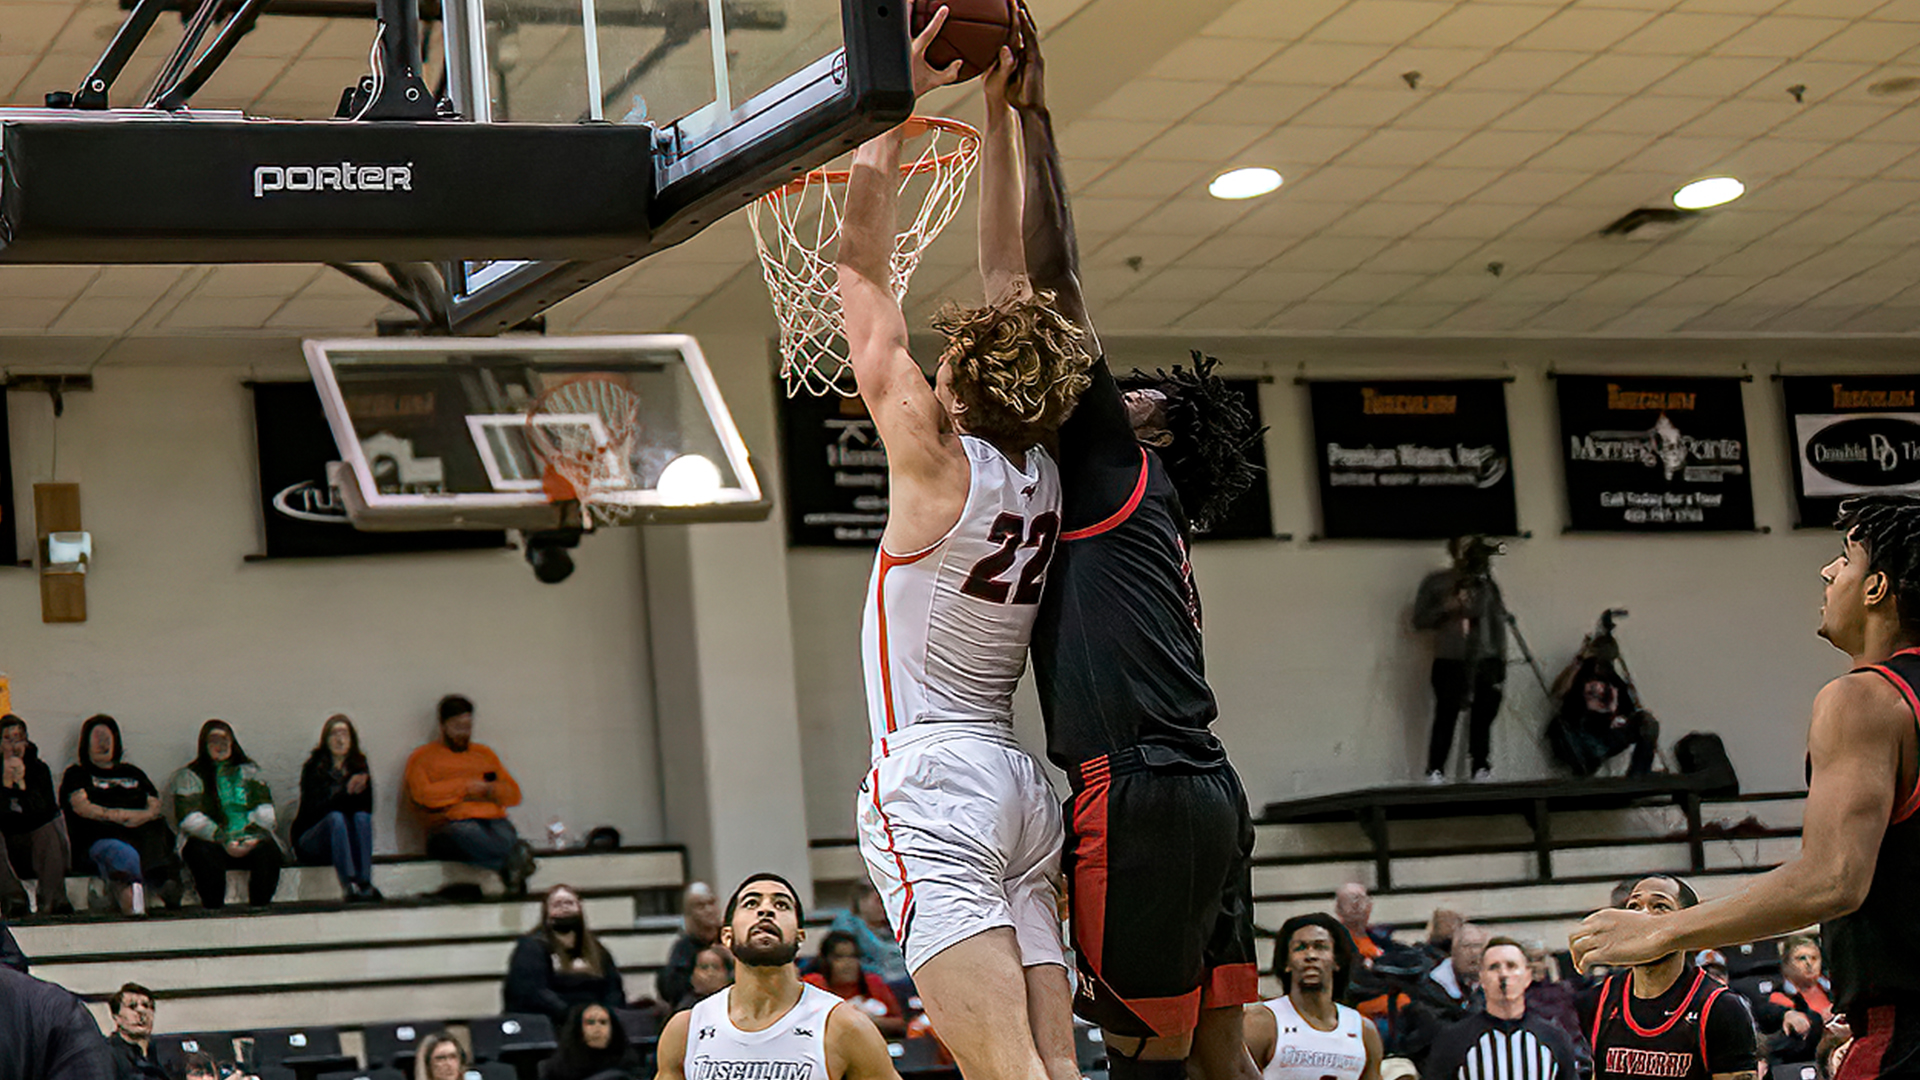 Jacob Hobbs scored a career-best 21 points in Tusculum's 73-57 win over Newberry (photo by Chuck Williams)